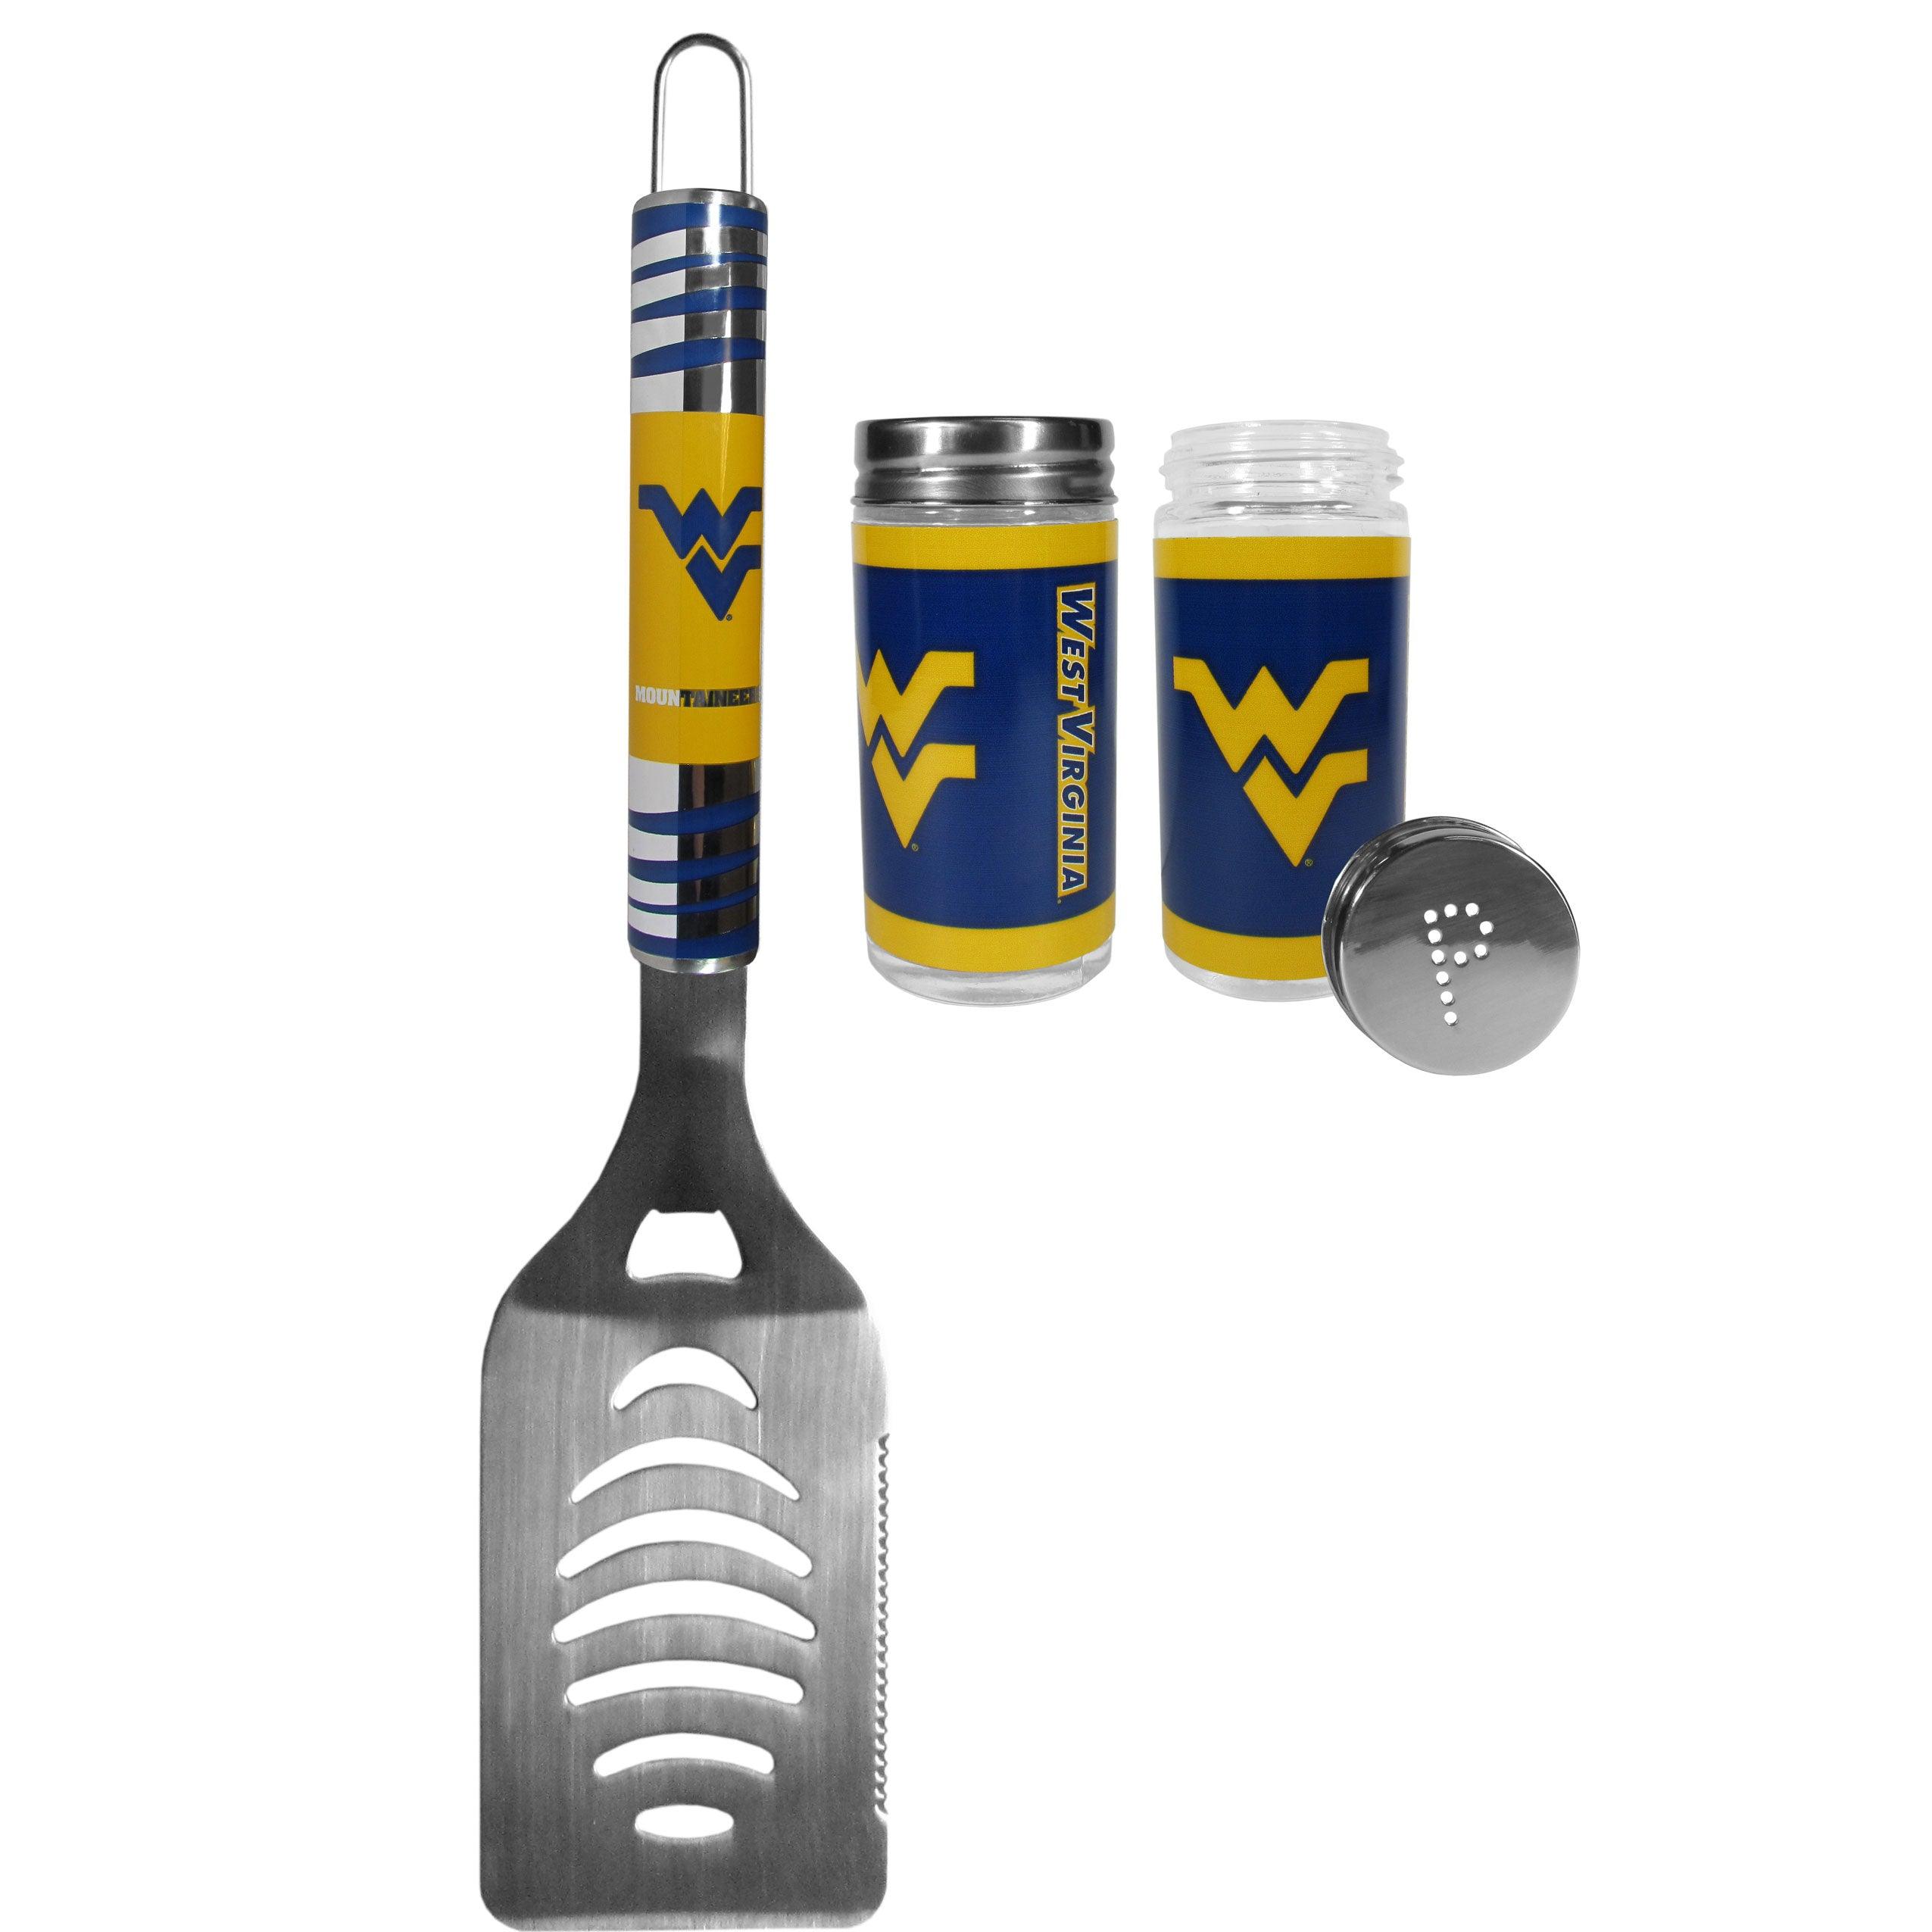 W. Virginia Mountaineers Tailgater Spatula and Salt and Pepper Shakers - Flyclothing LLC